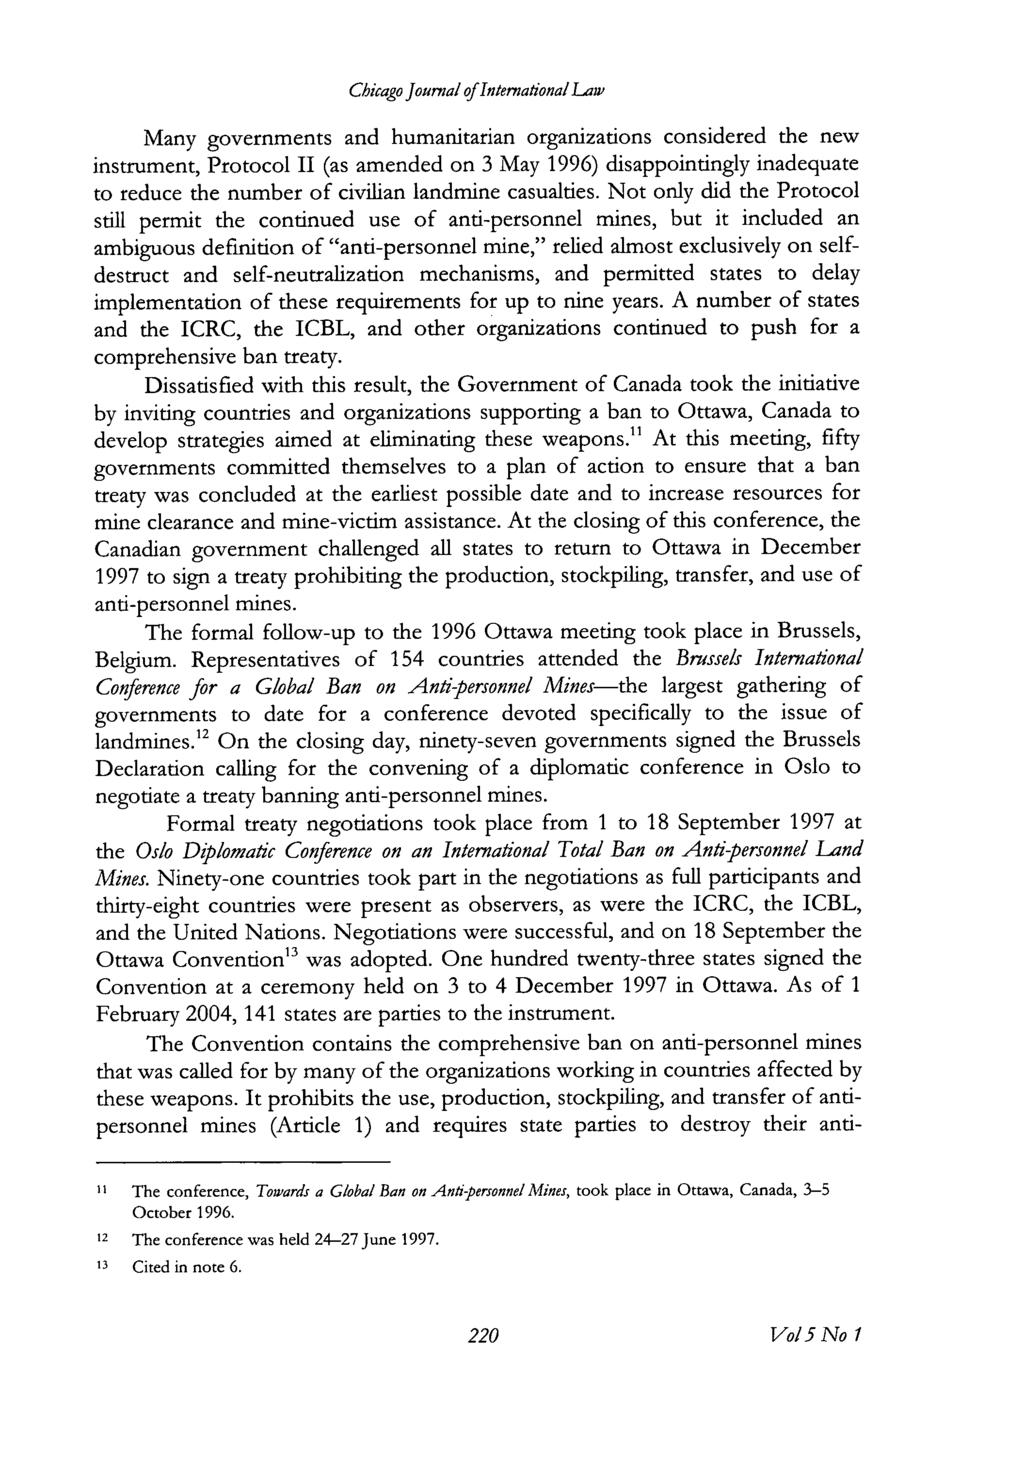 Chicago Journal of International Law Many governments and humanitarian organizations considered the new instrument, Protocol II (as amended on 3 May 1996) disappointingly inadequate to reduce the